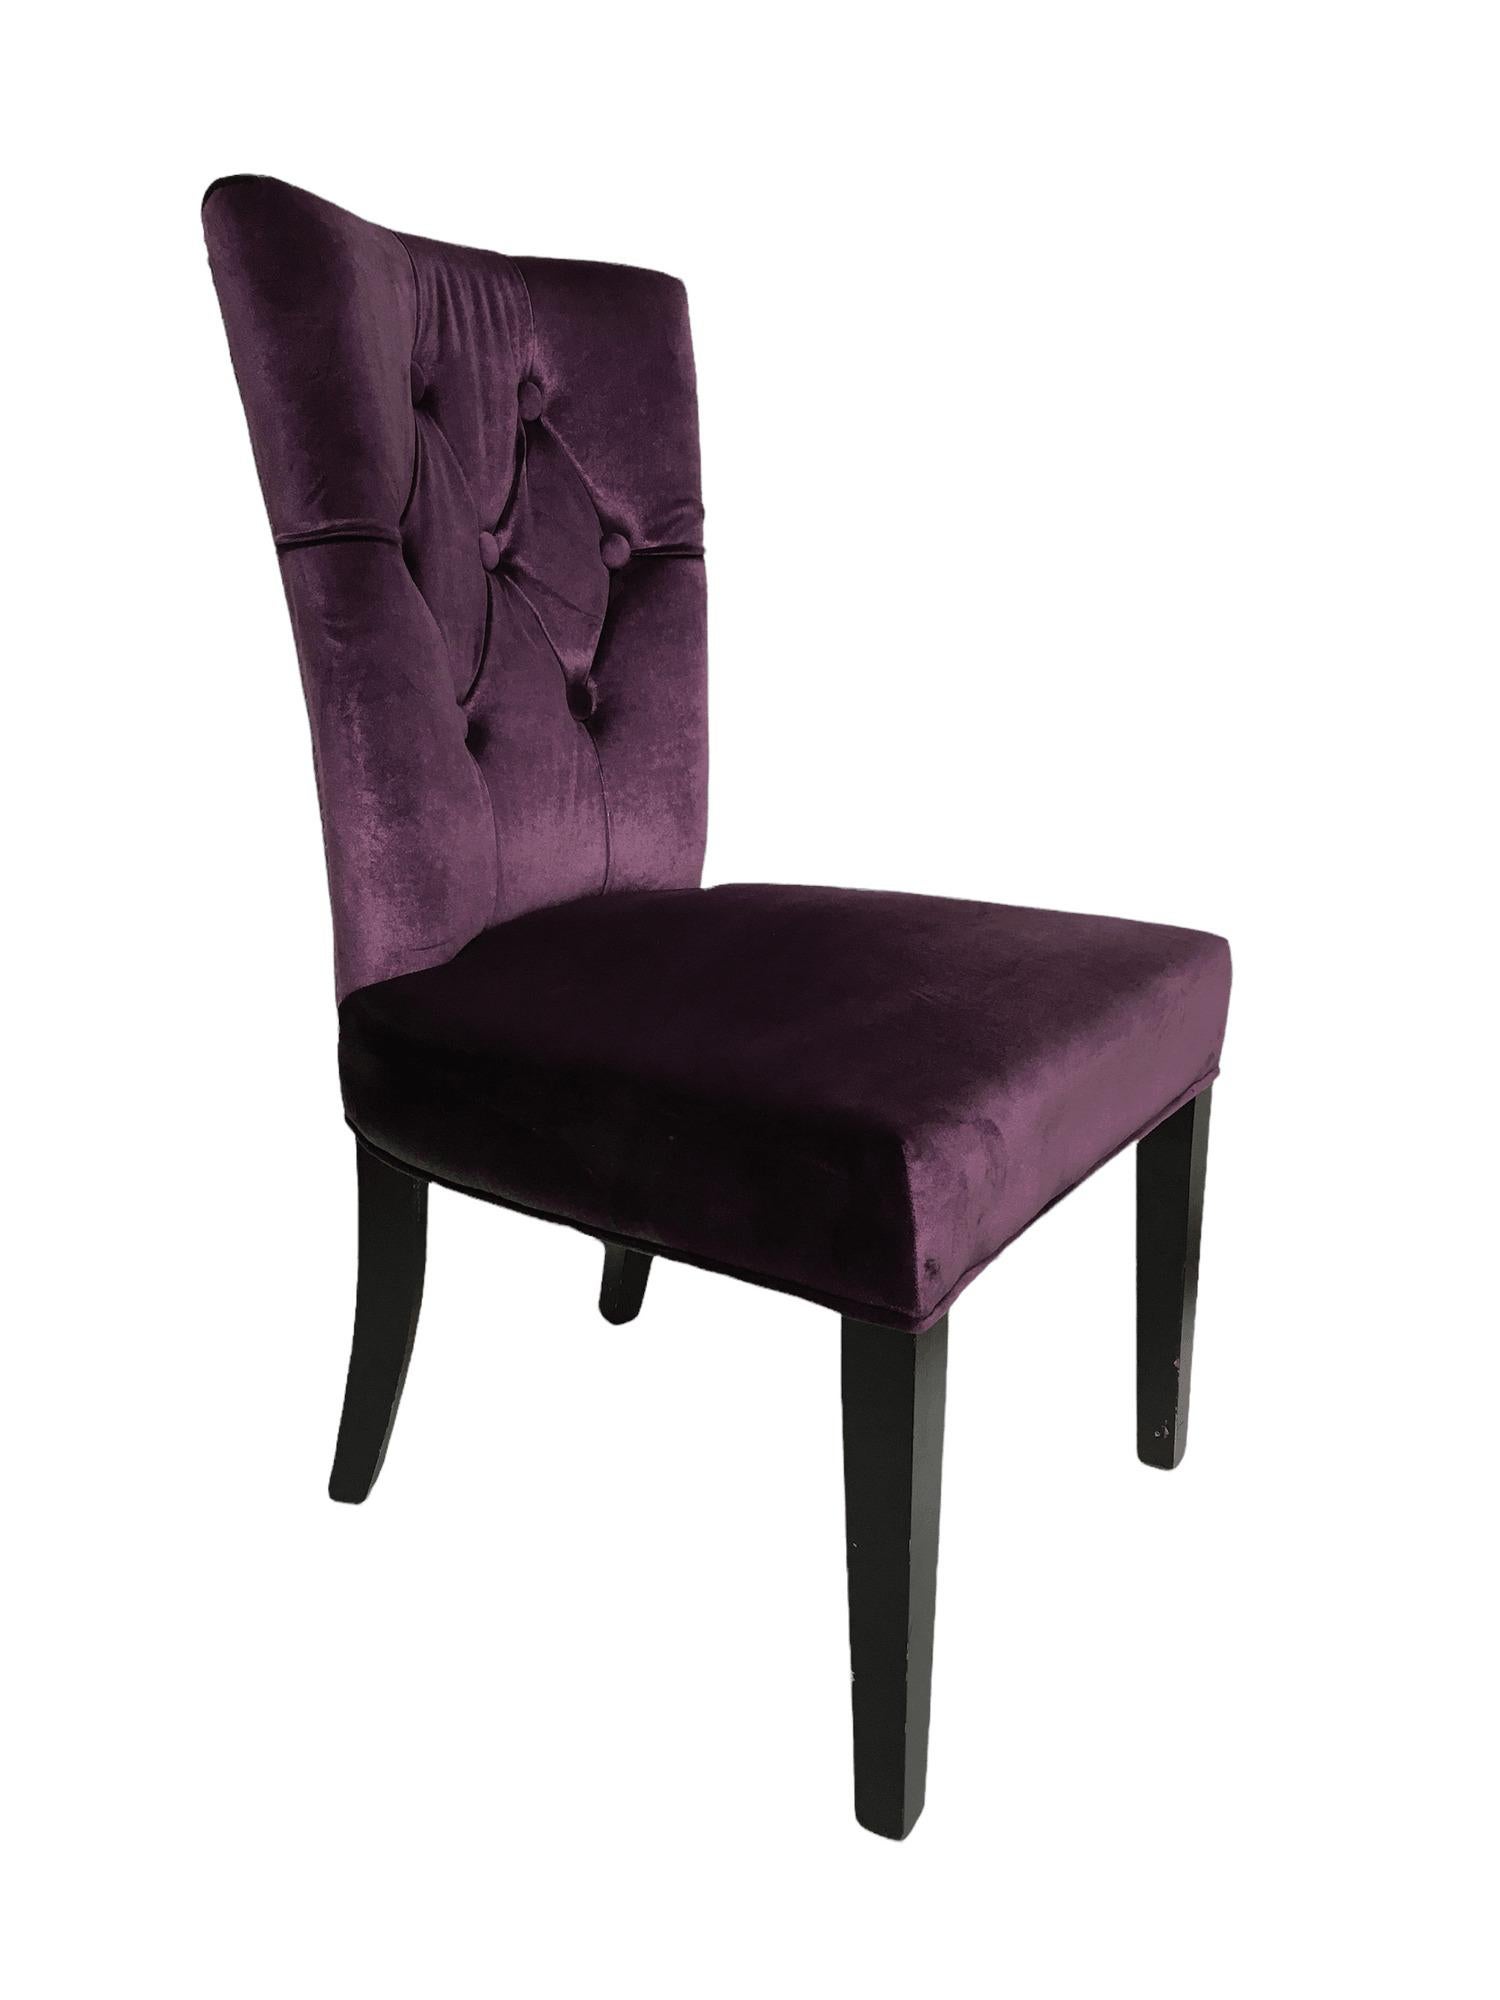 Vintage Purple Velvet Chairs with Tufted Padded Backrest. Set of 2. $1775
 
This set of purple chairs is in great condition. They feature a gorgeous tufted padded backrest, as well as a grommeted edge on its back in gold color. Bent back legs